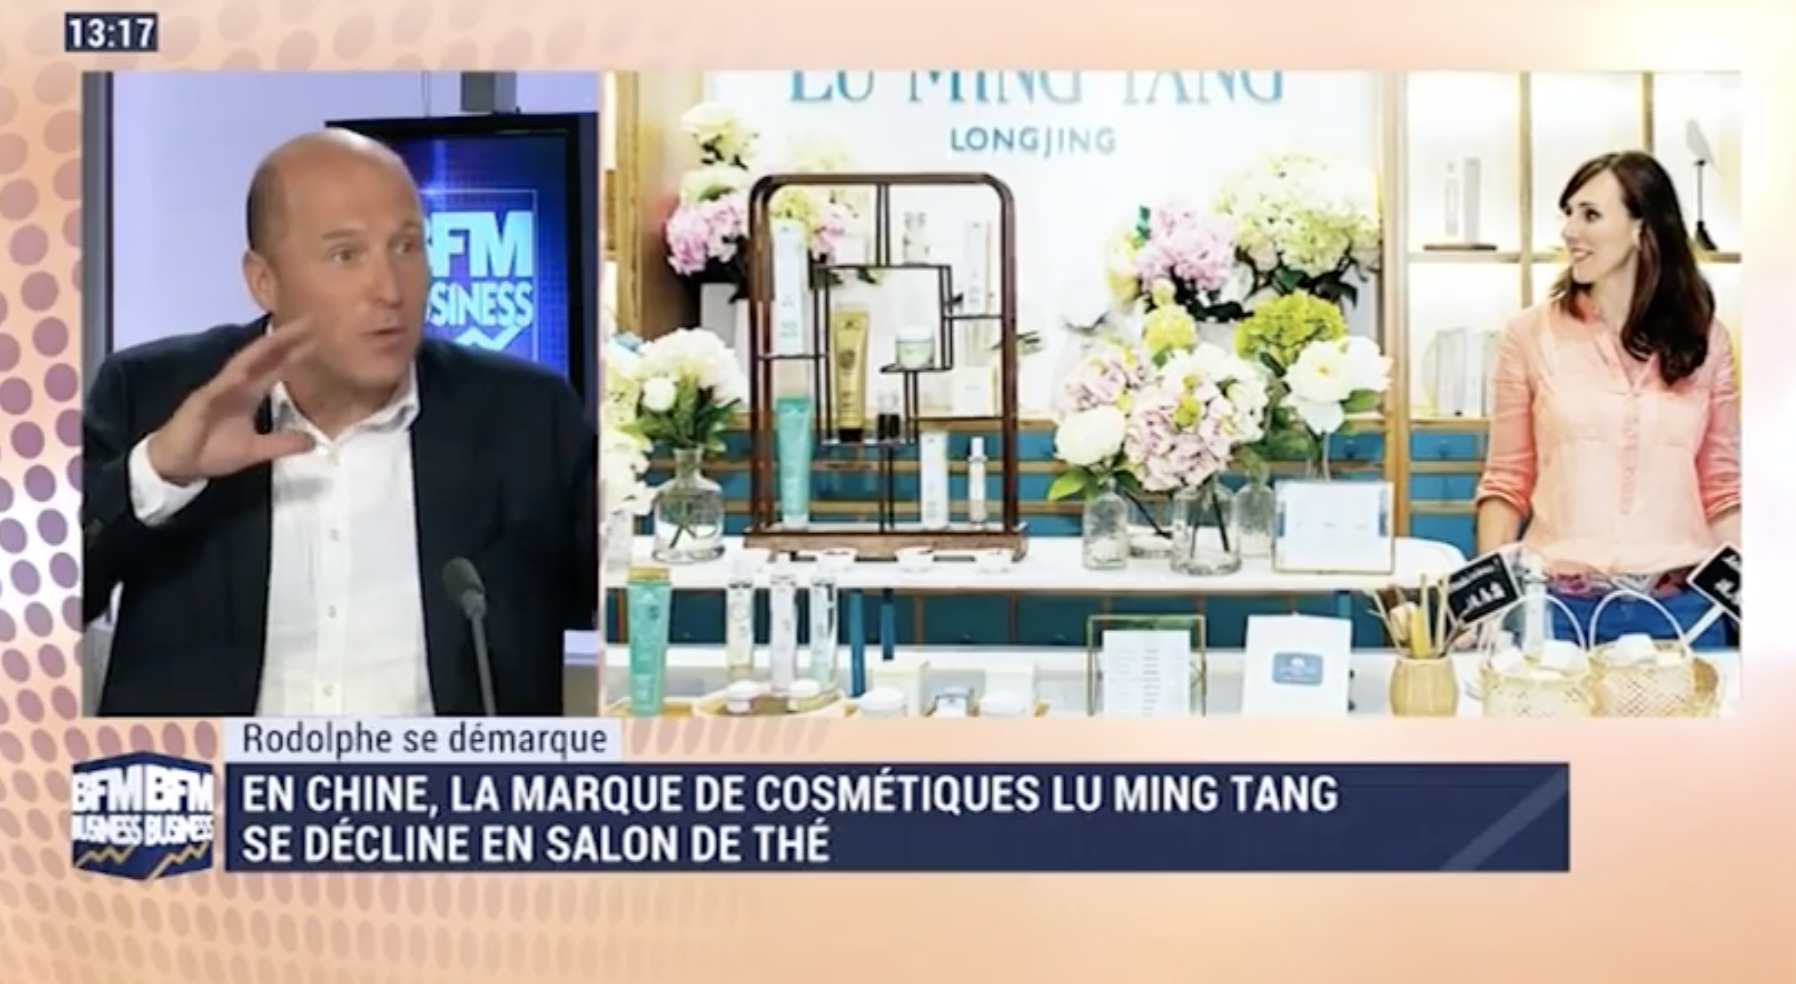 LU MING TANG / INNOVER POUR LE COMMERCE